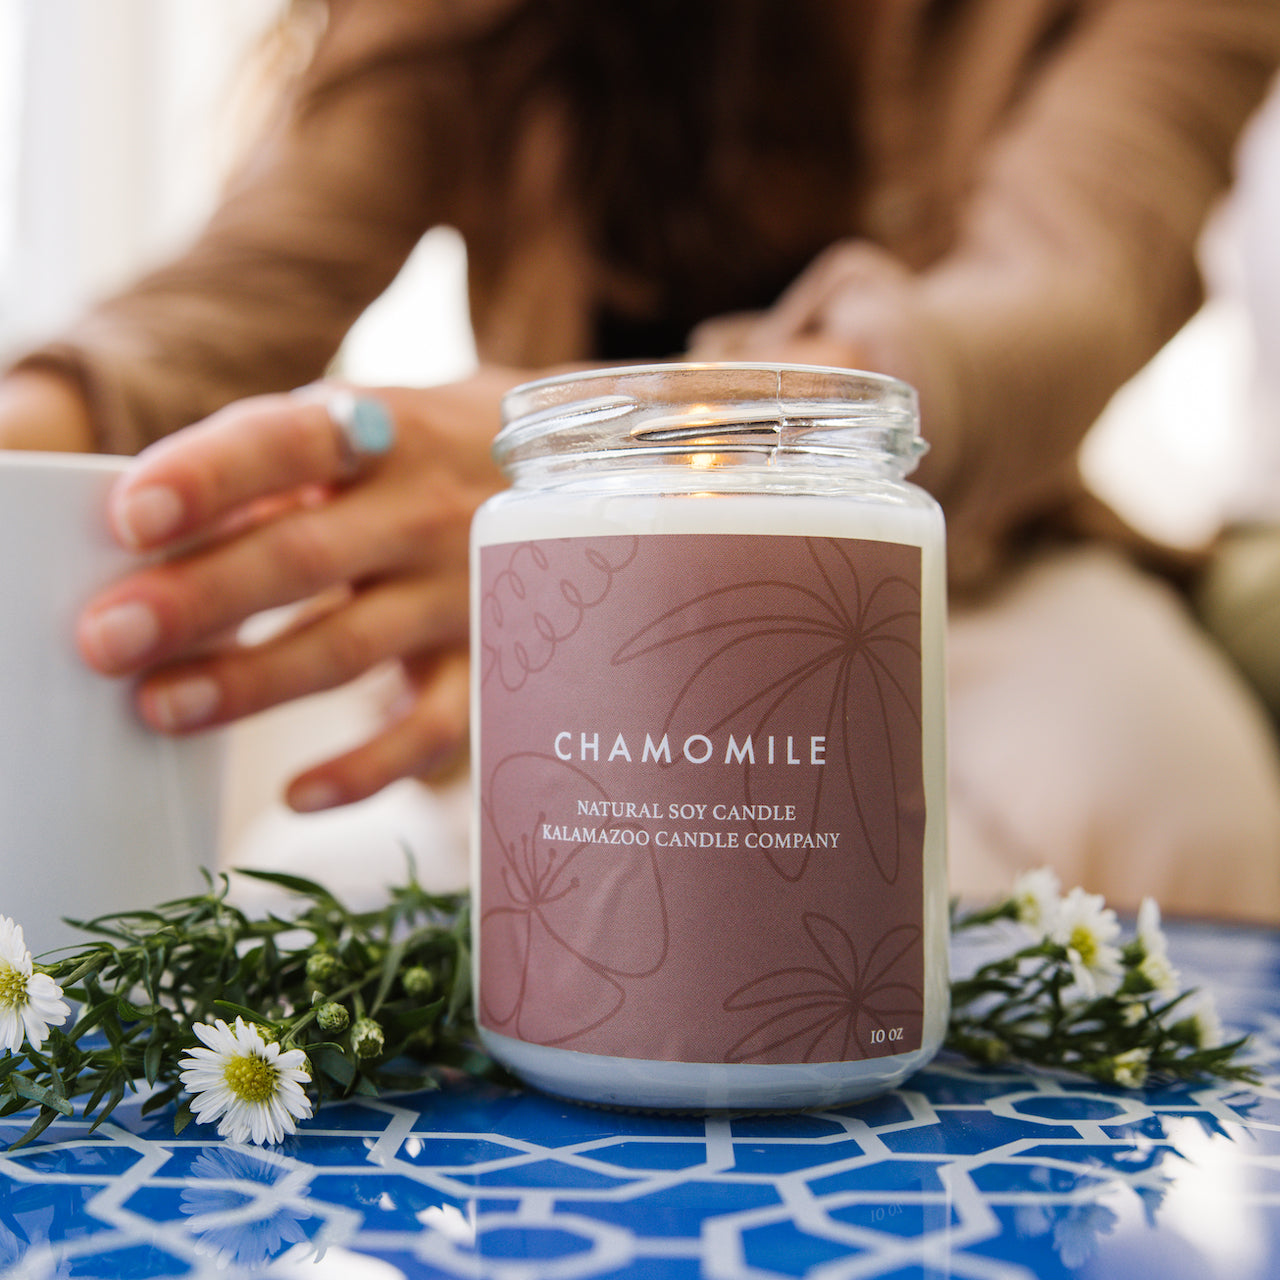 Chamomile candle on a outdoor table